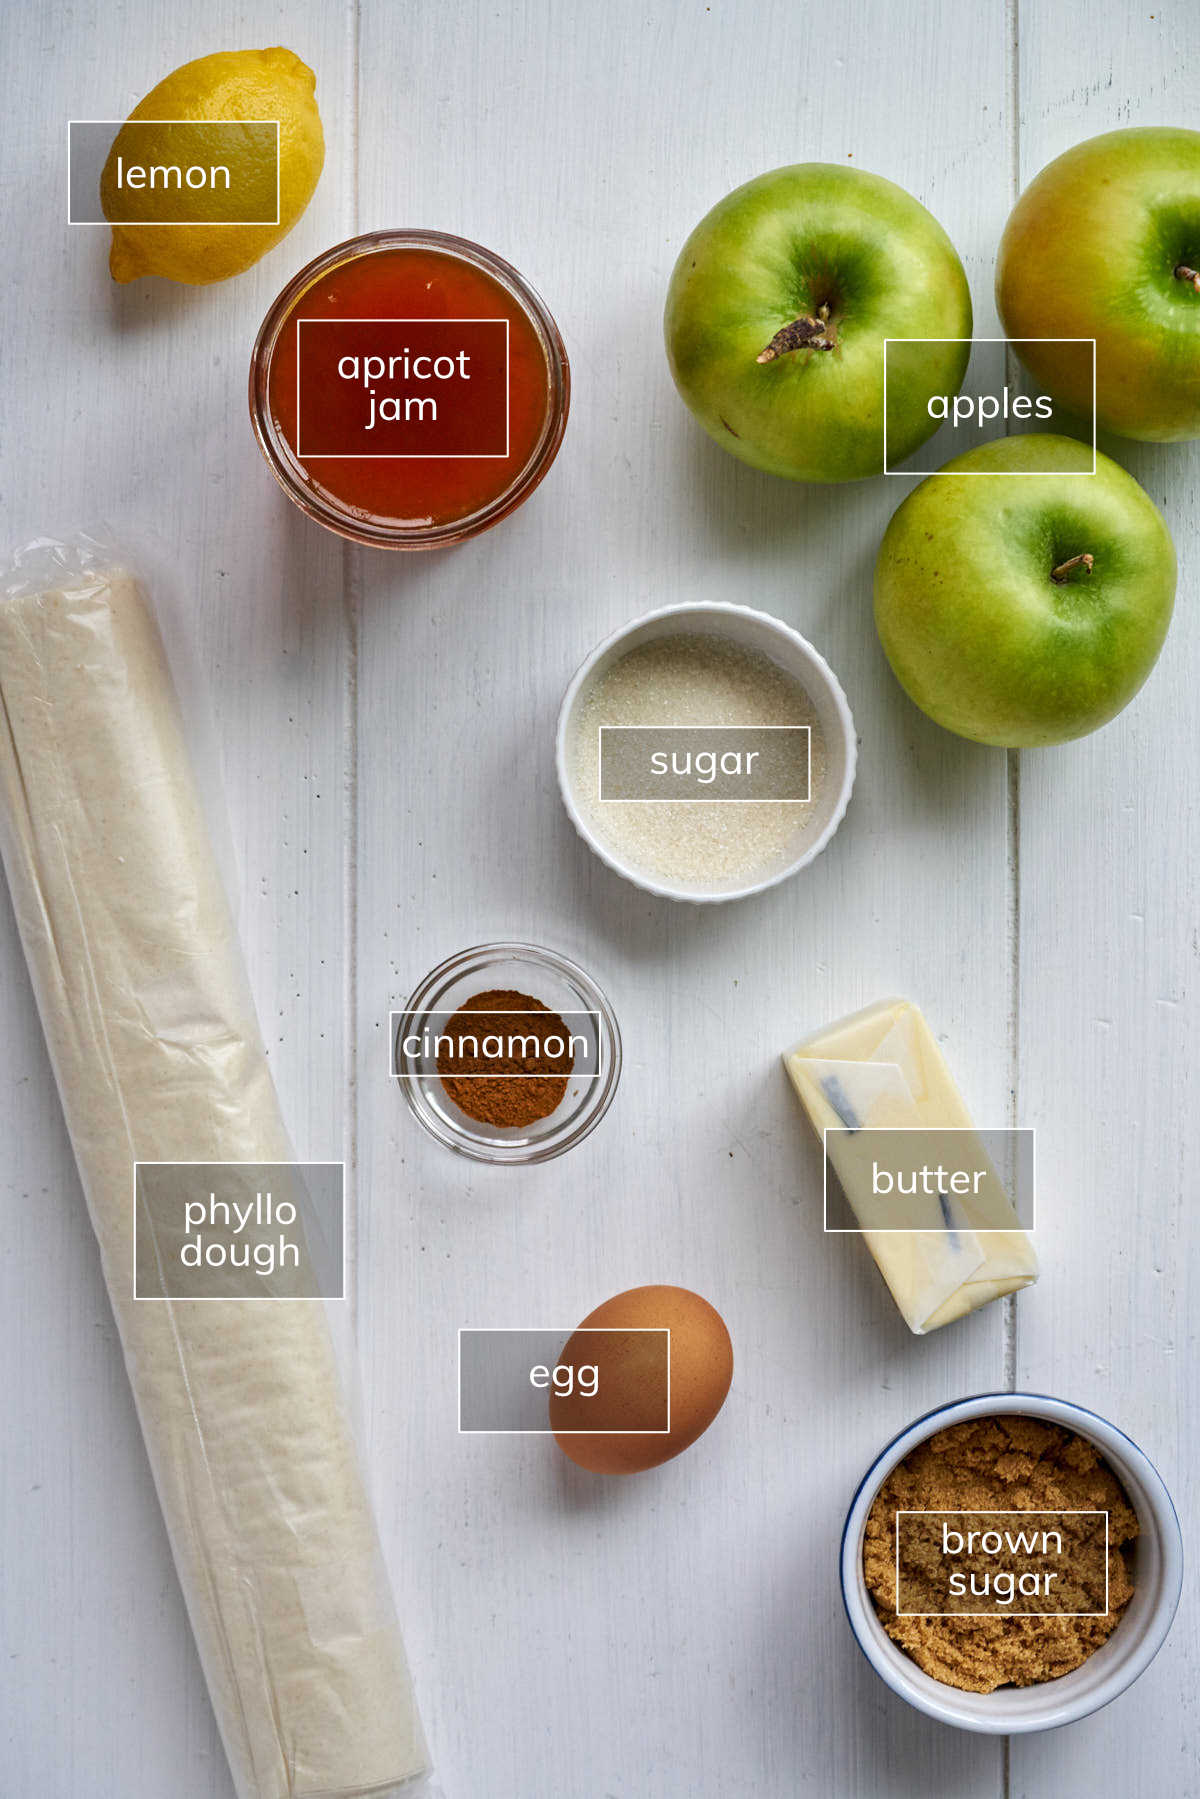 Ingredients for apple strudel on white table.